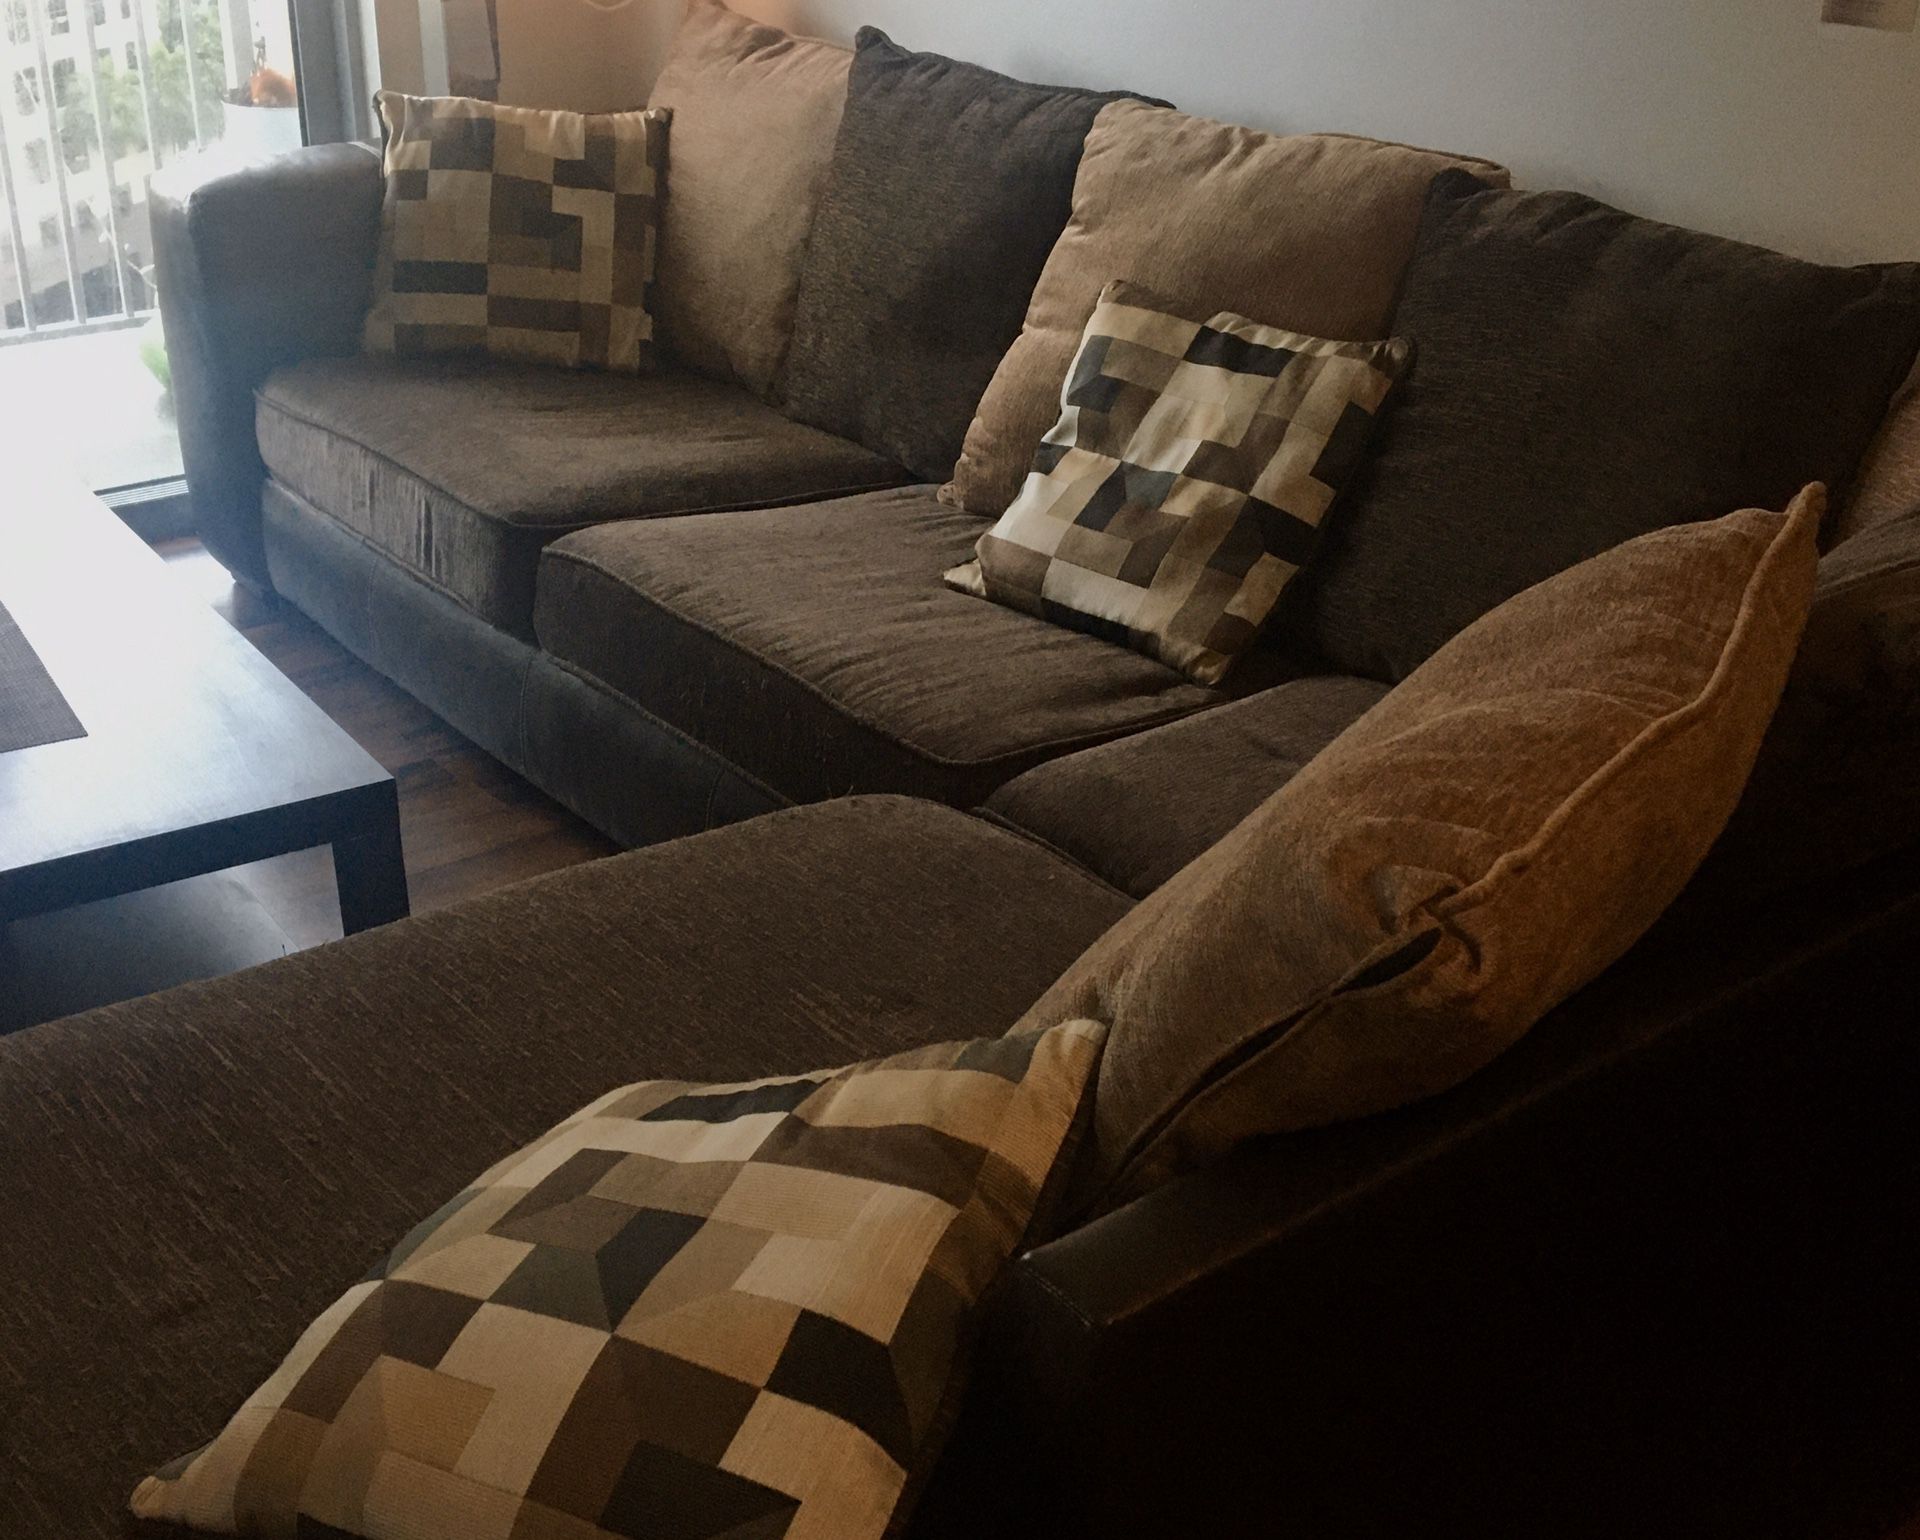 Beautiful couch with ikea coffee table